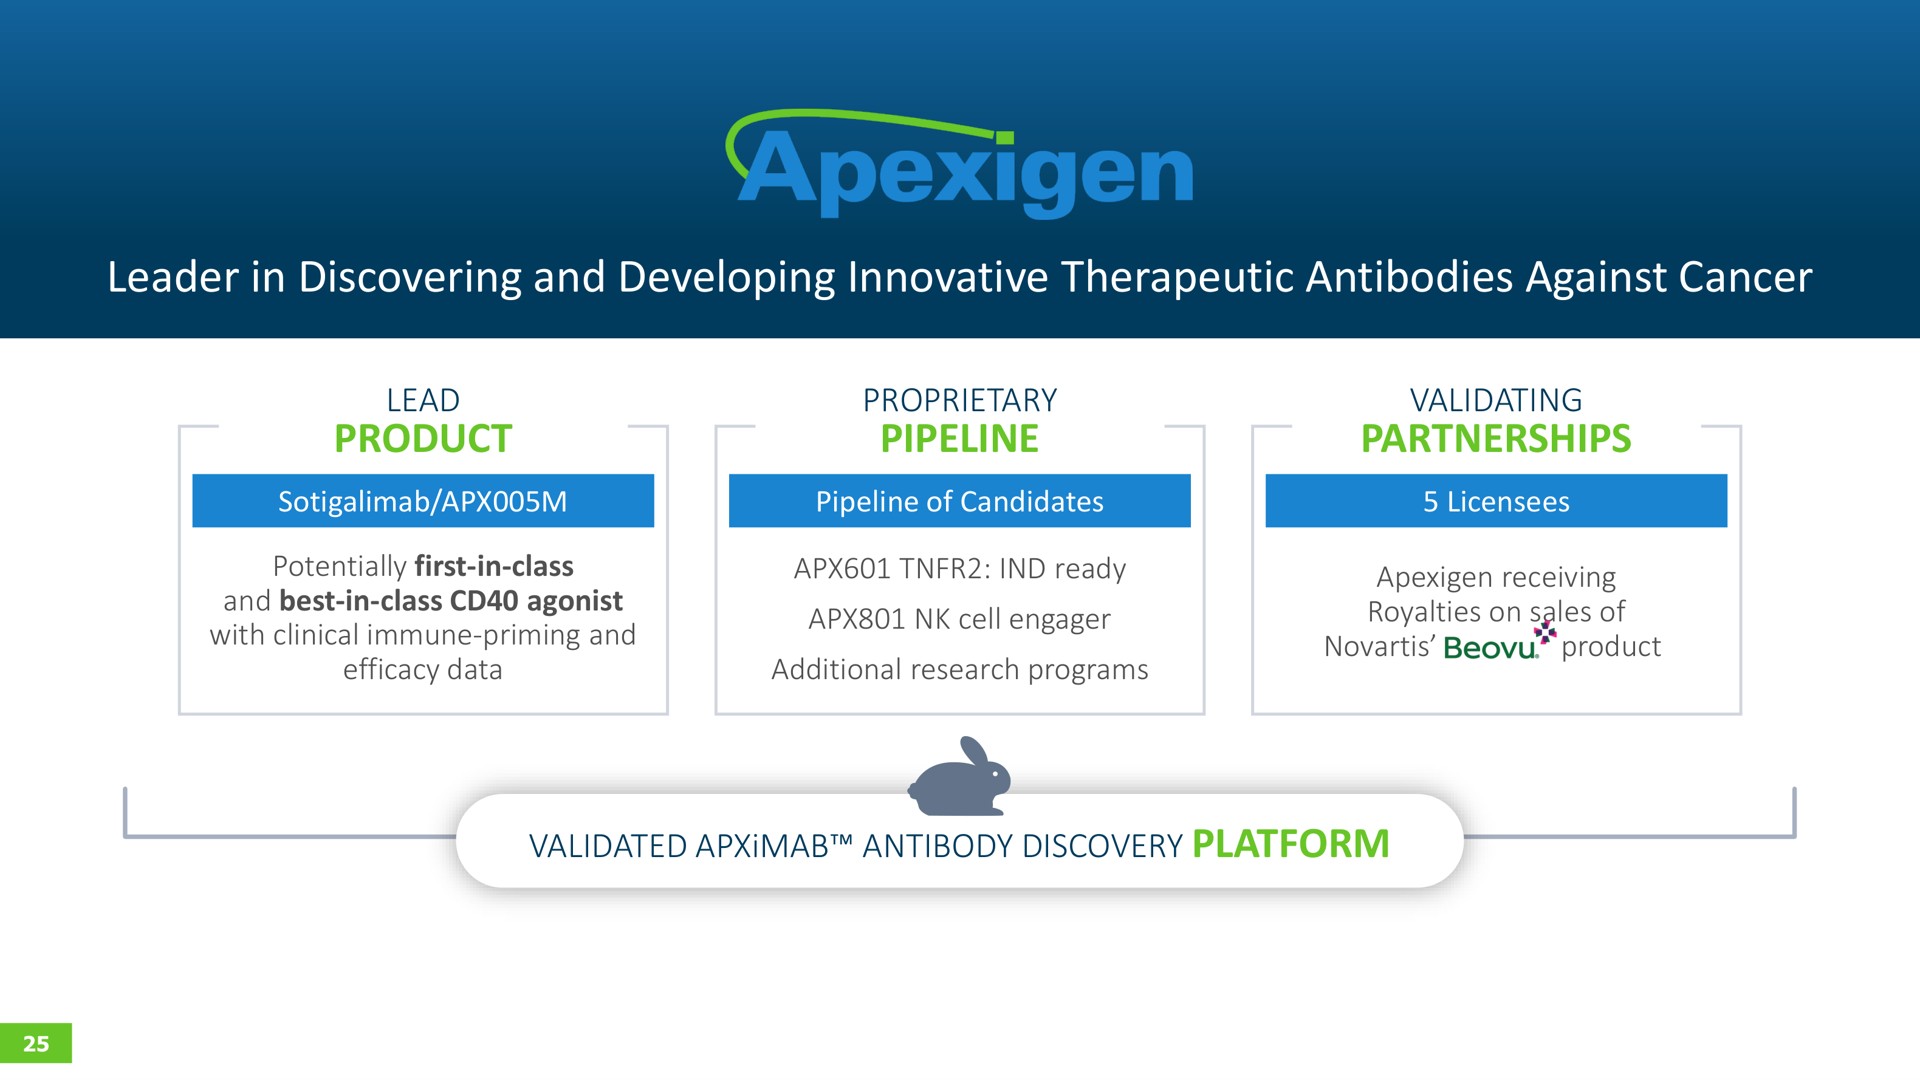 leader in discovering and developing innovative therapeutic antibodies against cancer | Apexigen